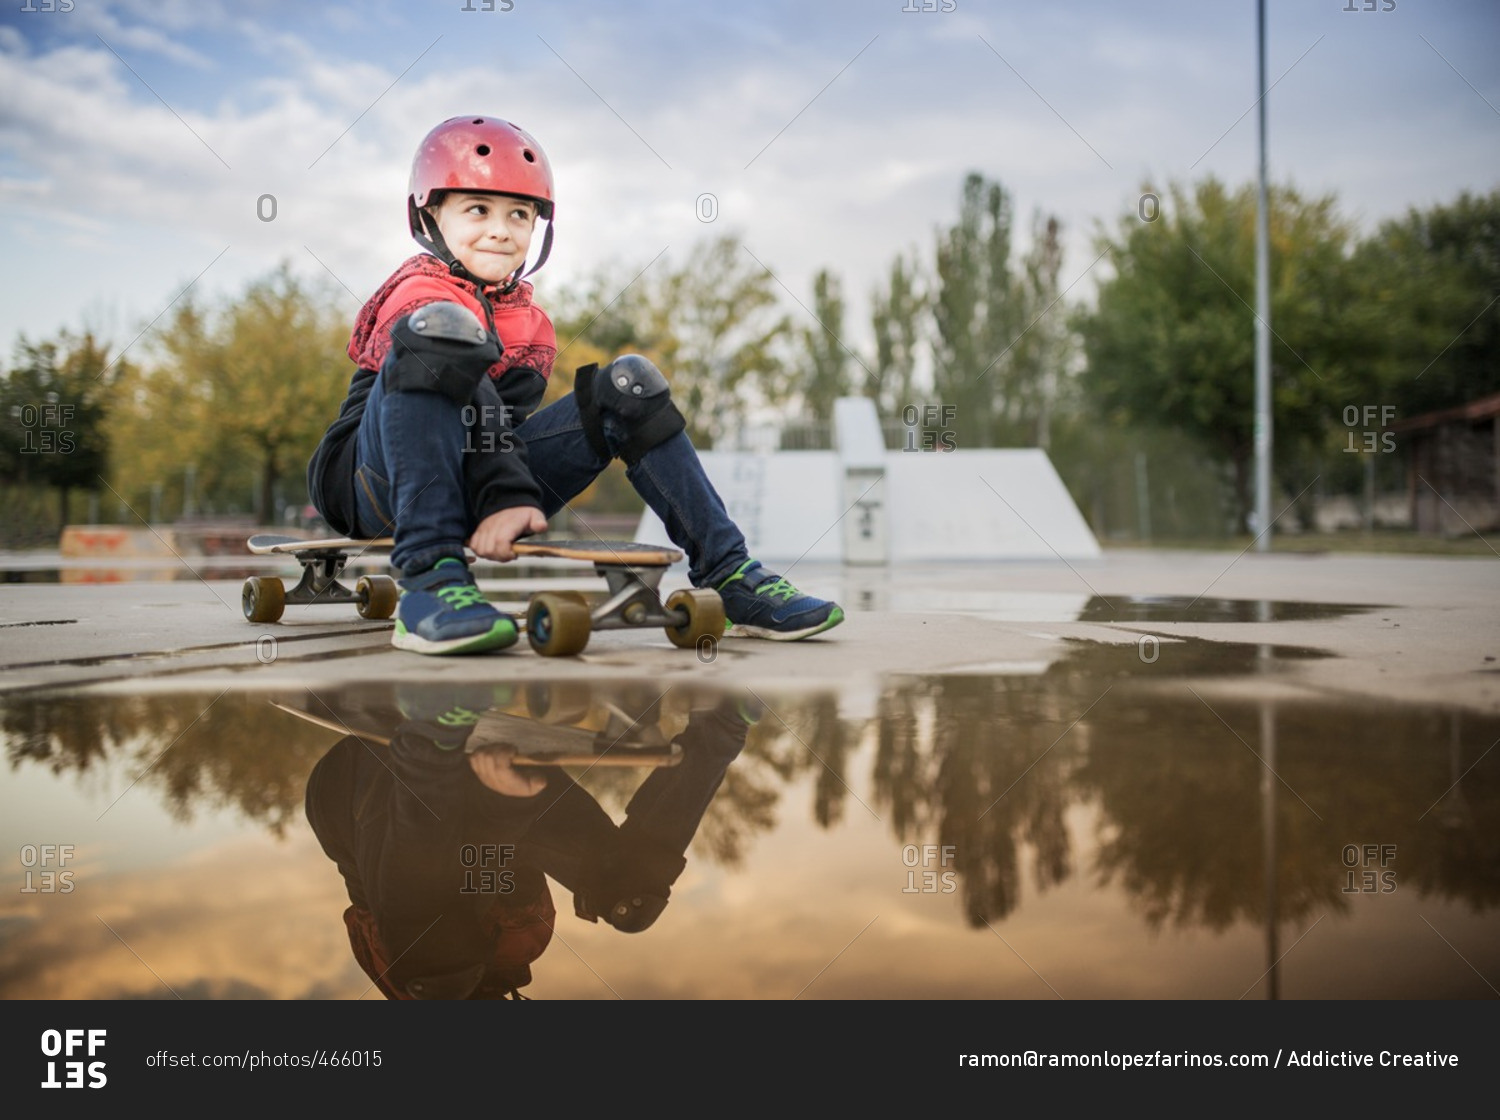 Smiling kid with red helmet and knee pads with long board by a puddle at the skate park